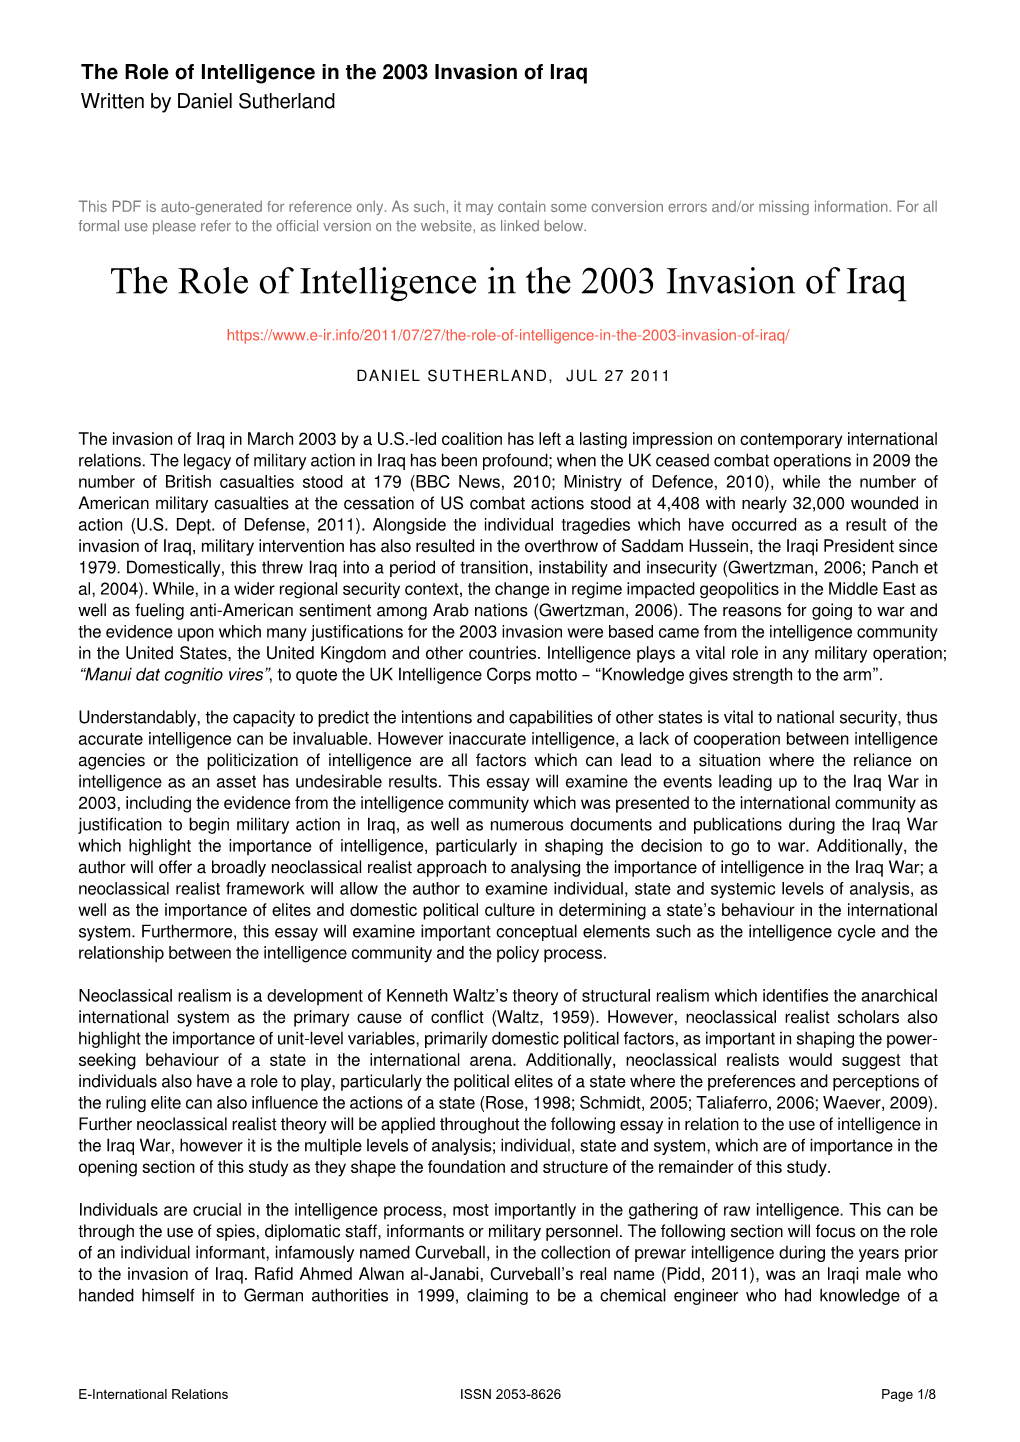 The Role of Intelligence in the 2003 Invasion of Iraq Written by Daniel Sutherland